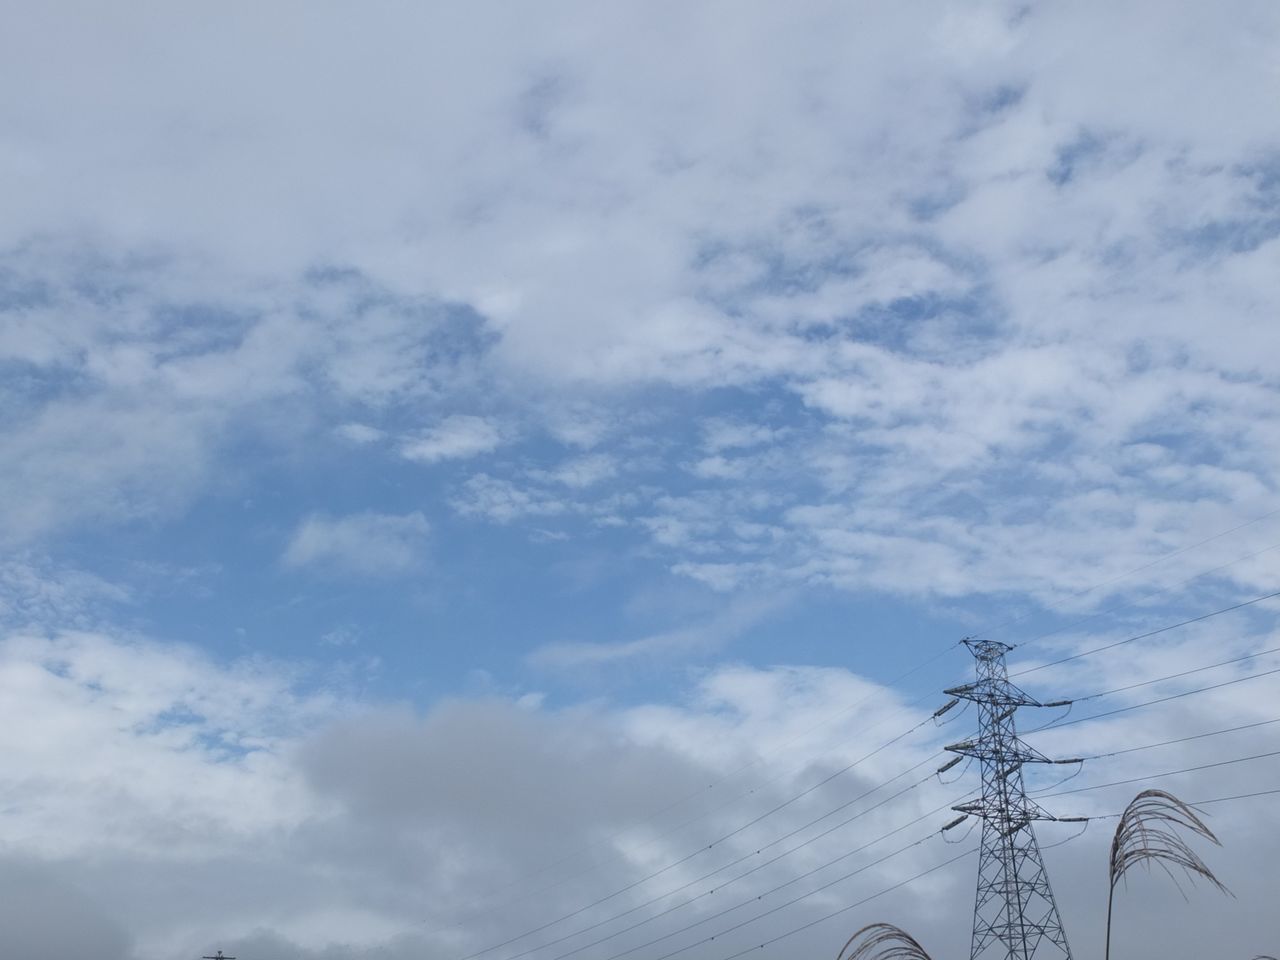 power line, low angle view, sky, electricity pylon, power supply, electricity, cloud - sky, cable, connection, cloudy, technology, fuel and power generation, nature, cloud, outdoors, tranquility, no people, beauty in nature, day, power cable